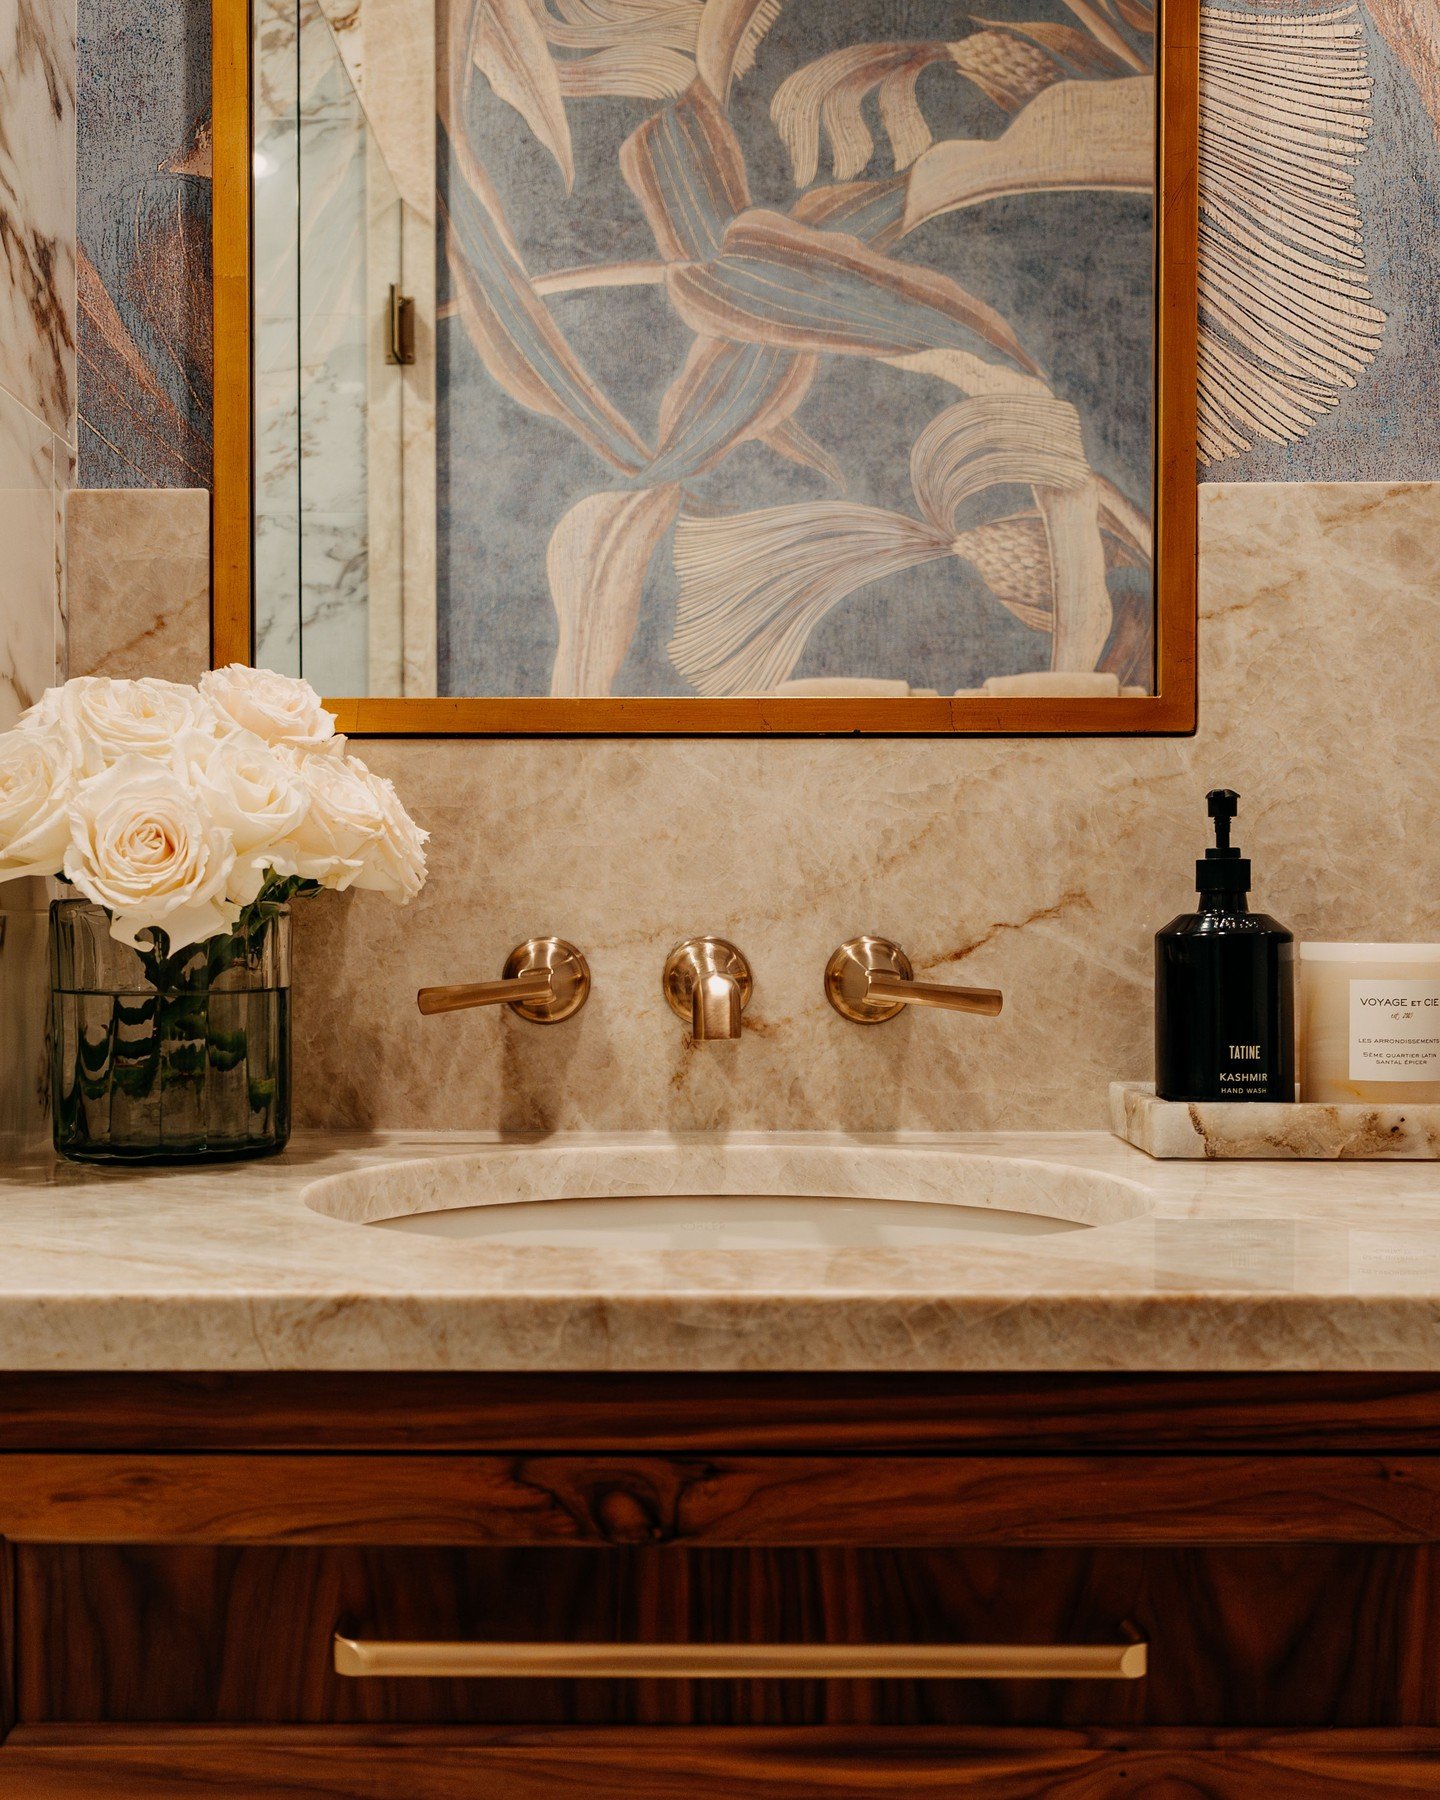 All the lovely details in our Troost Ave guest bath 🤎